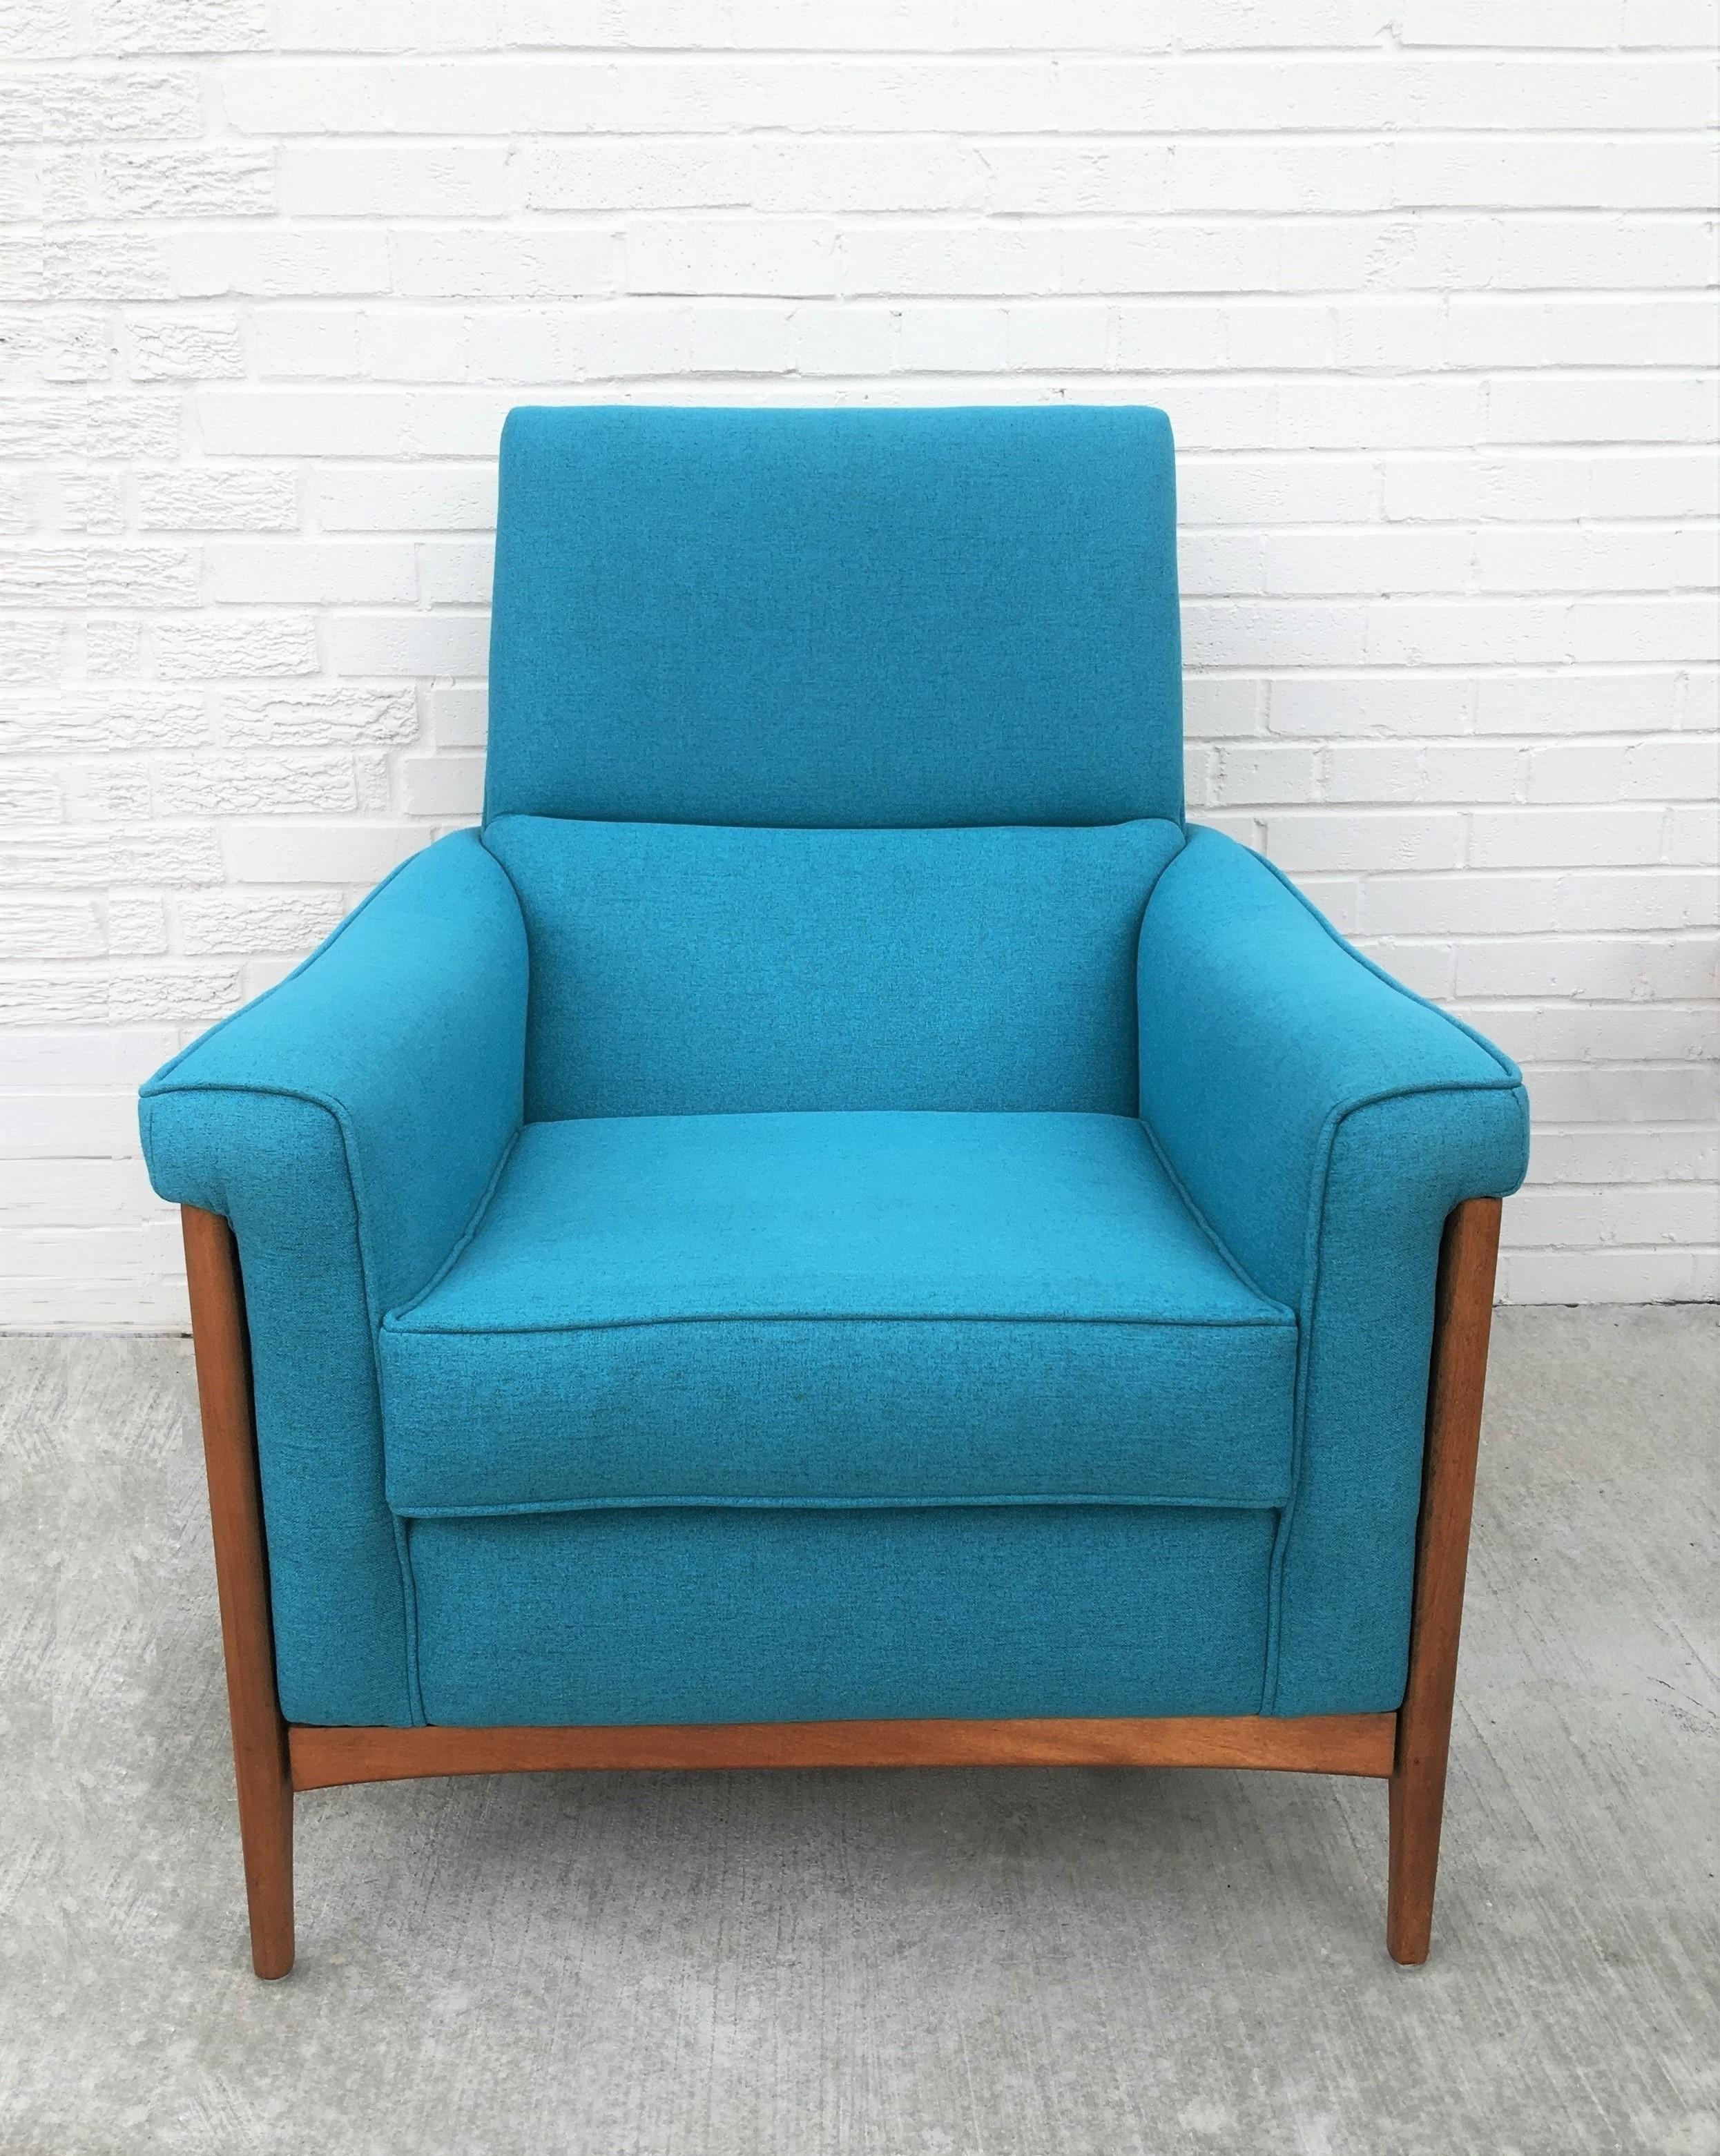 Well designed pair of sculptural armchairs by the Kroehler Co. Featuring blue fabric upholstery, solid American wood construction with comfortable deep seats. The sculptural legs reach up to the sloping arm rests of the chairs that brings a classy